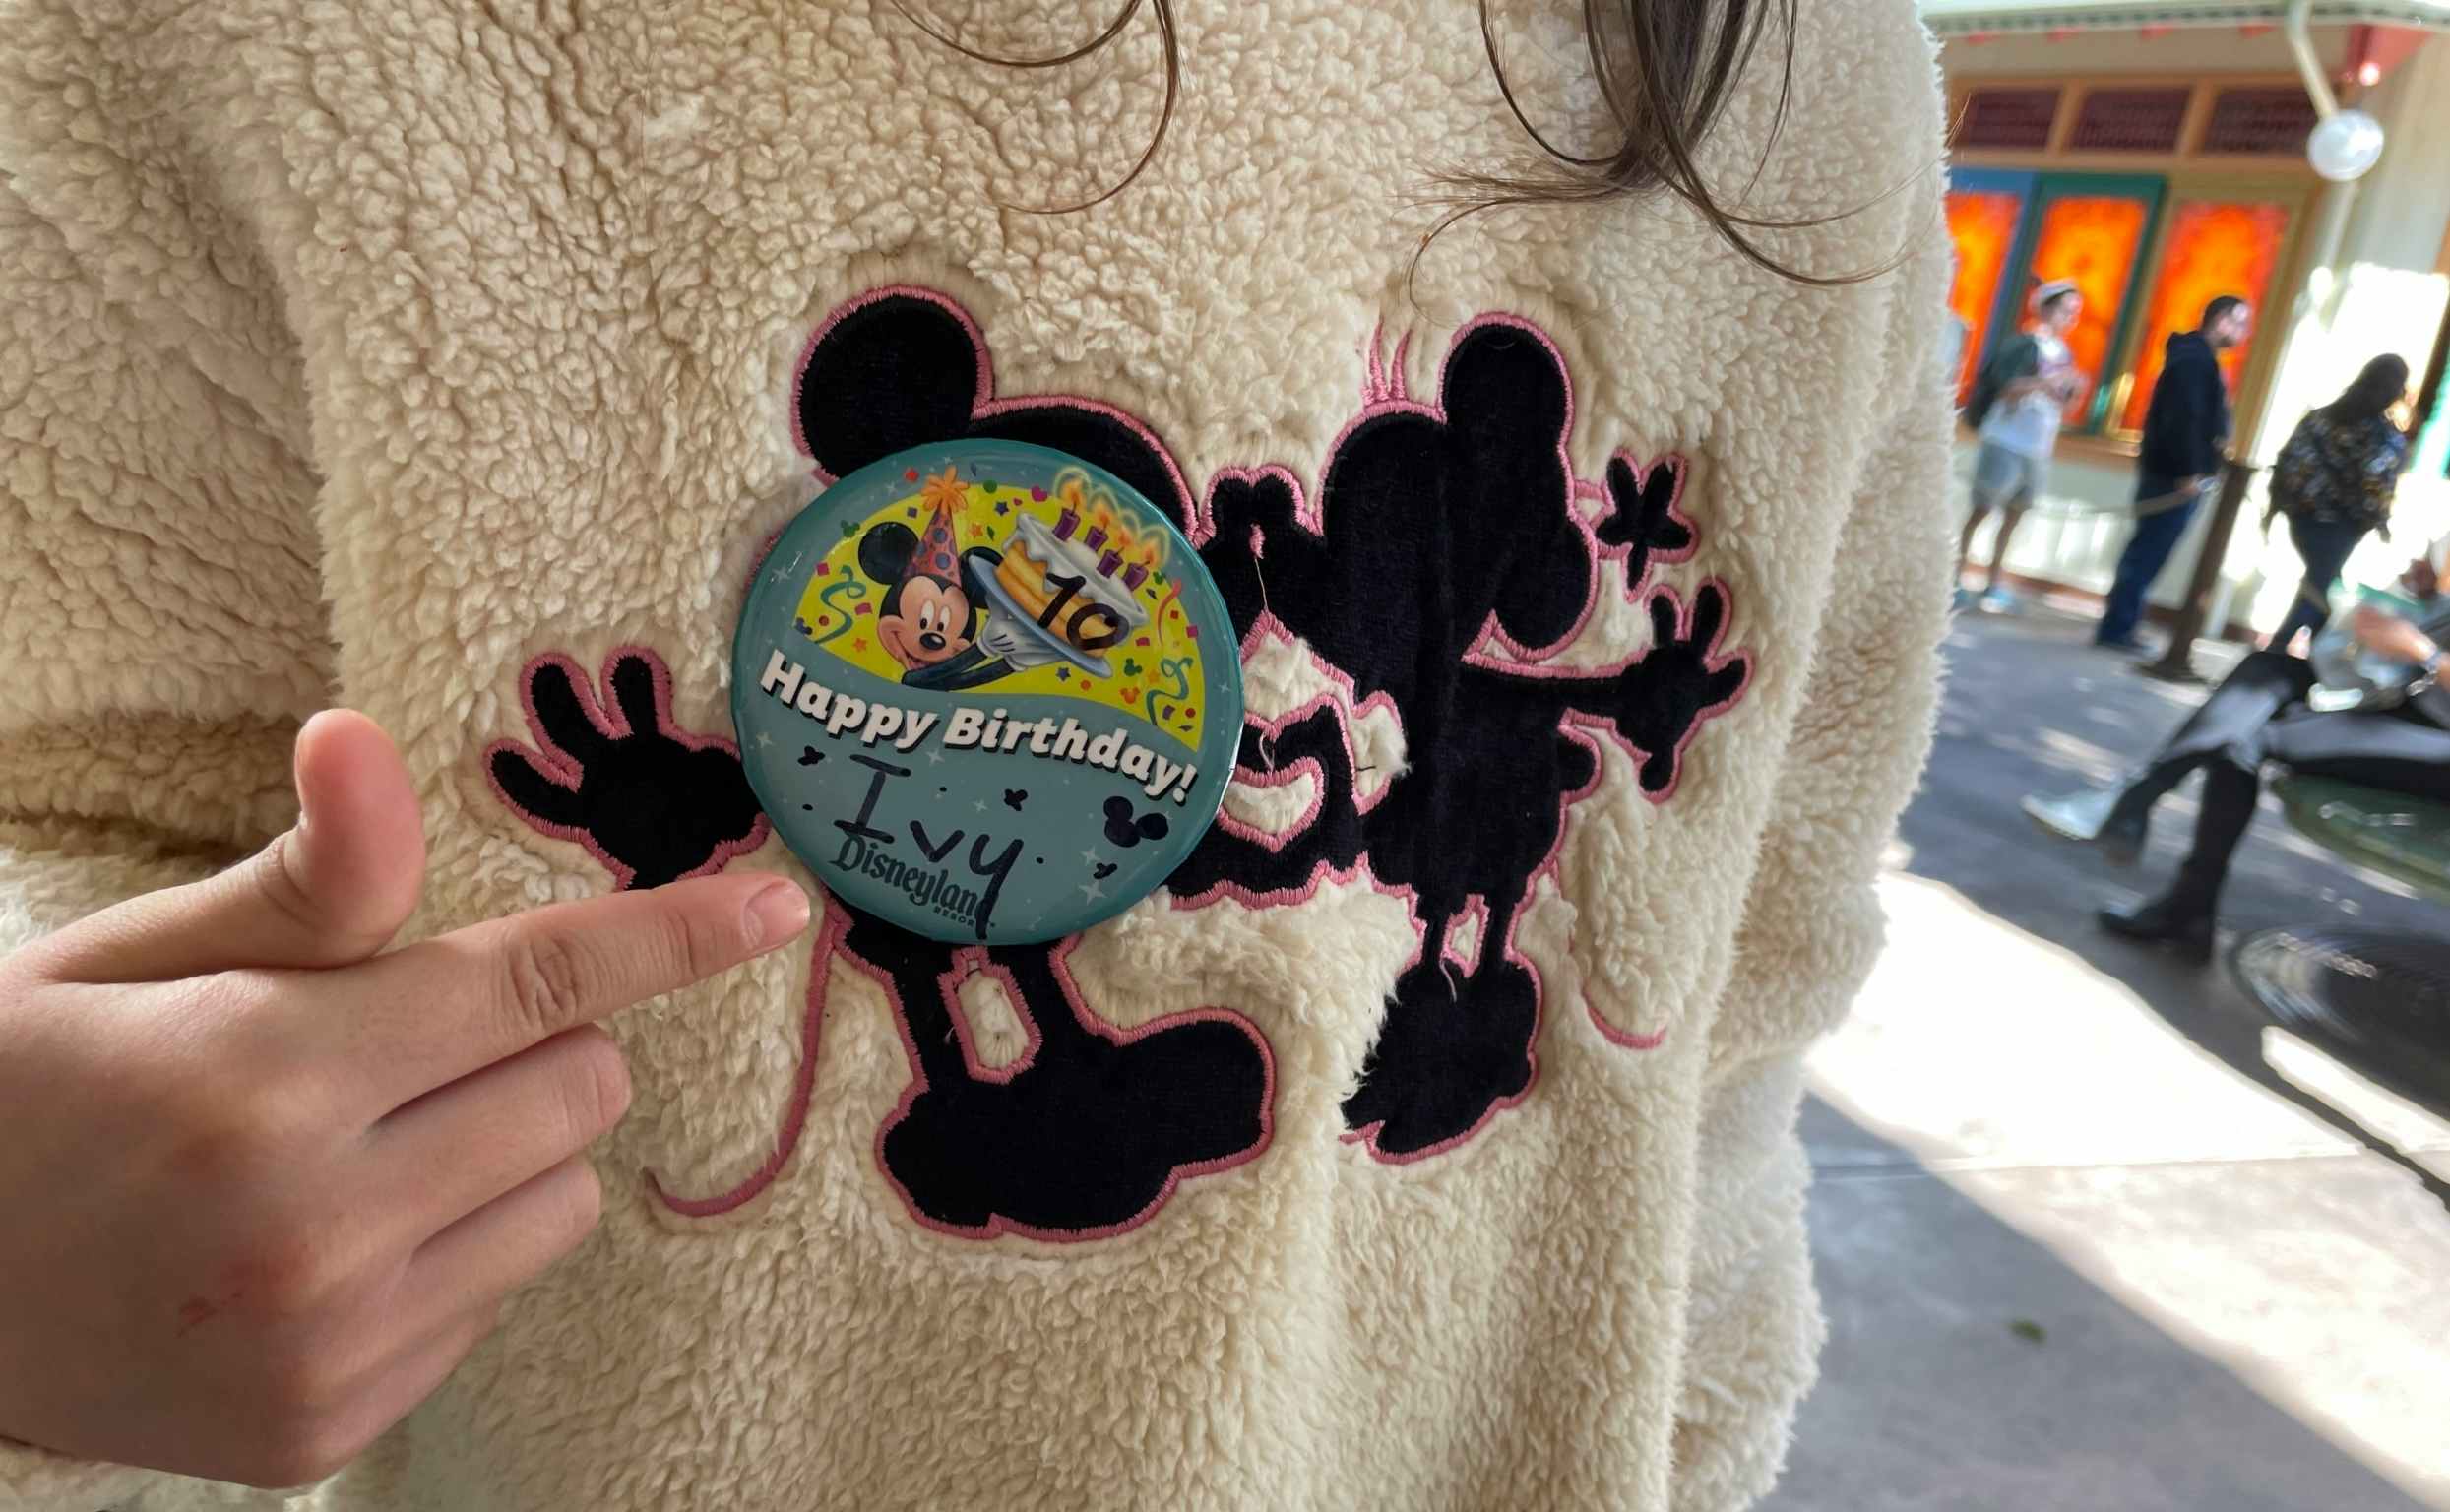 A close up of a Disney birthday button pinned on a child's Mickey and Minnie sweatshirt.